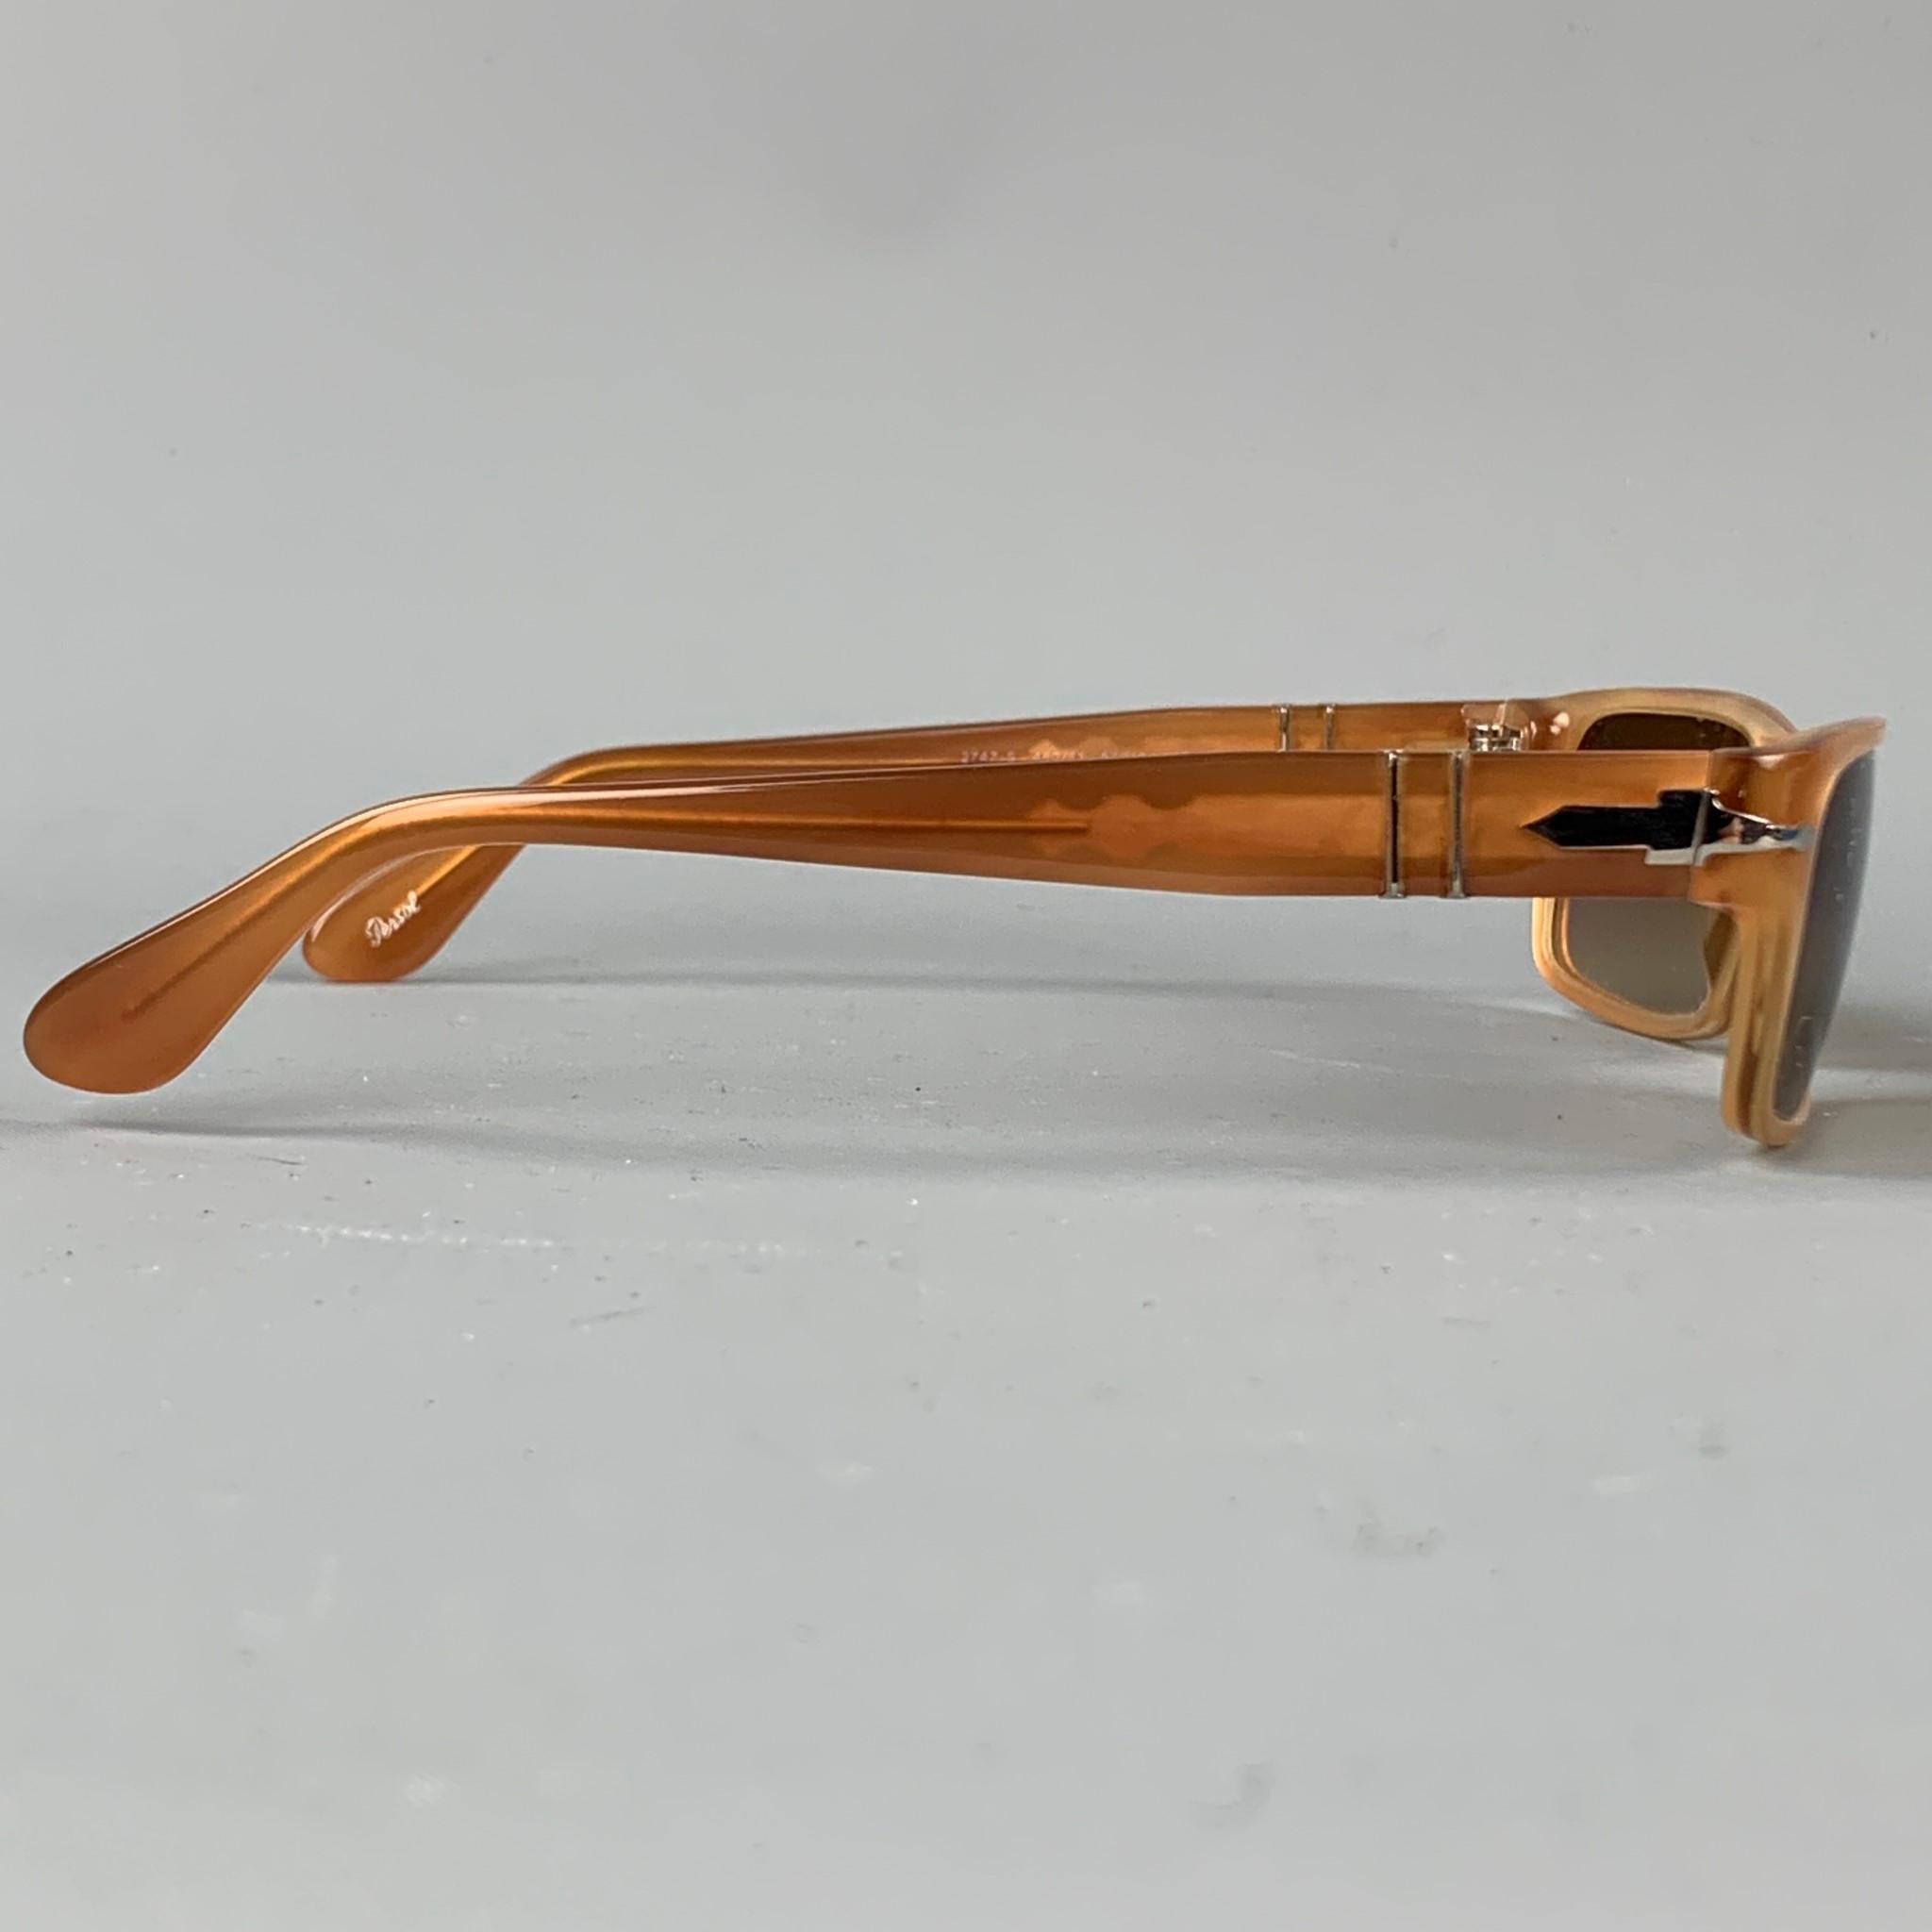 PERSOL sunglasses comes in a beige acetate with silver tone details. Comes with box. Handmade in Italy.

Very Good Pre-Owned Condition.
Marked: 2747-S 480/51 57-16 140 2N

Measurements:

Length: 14 cm.
Height: 3.5 cm. 